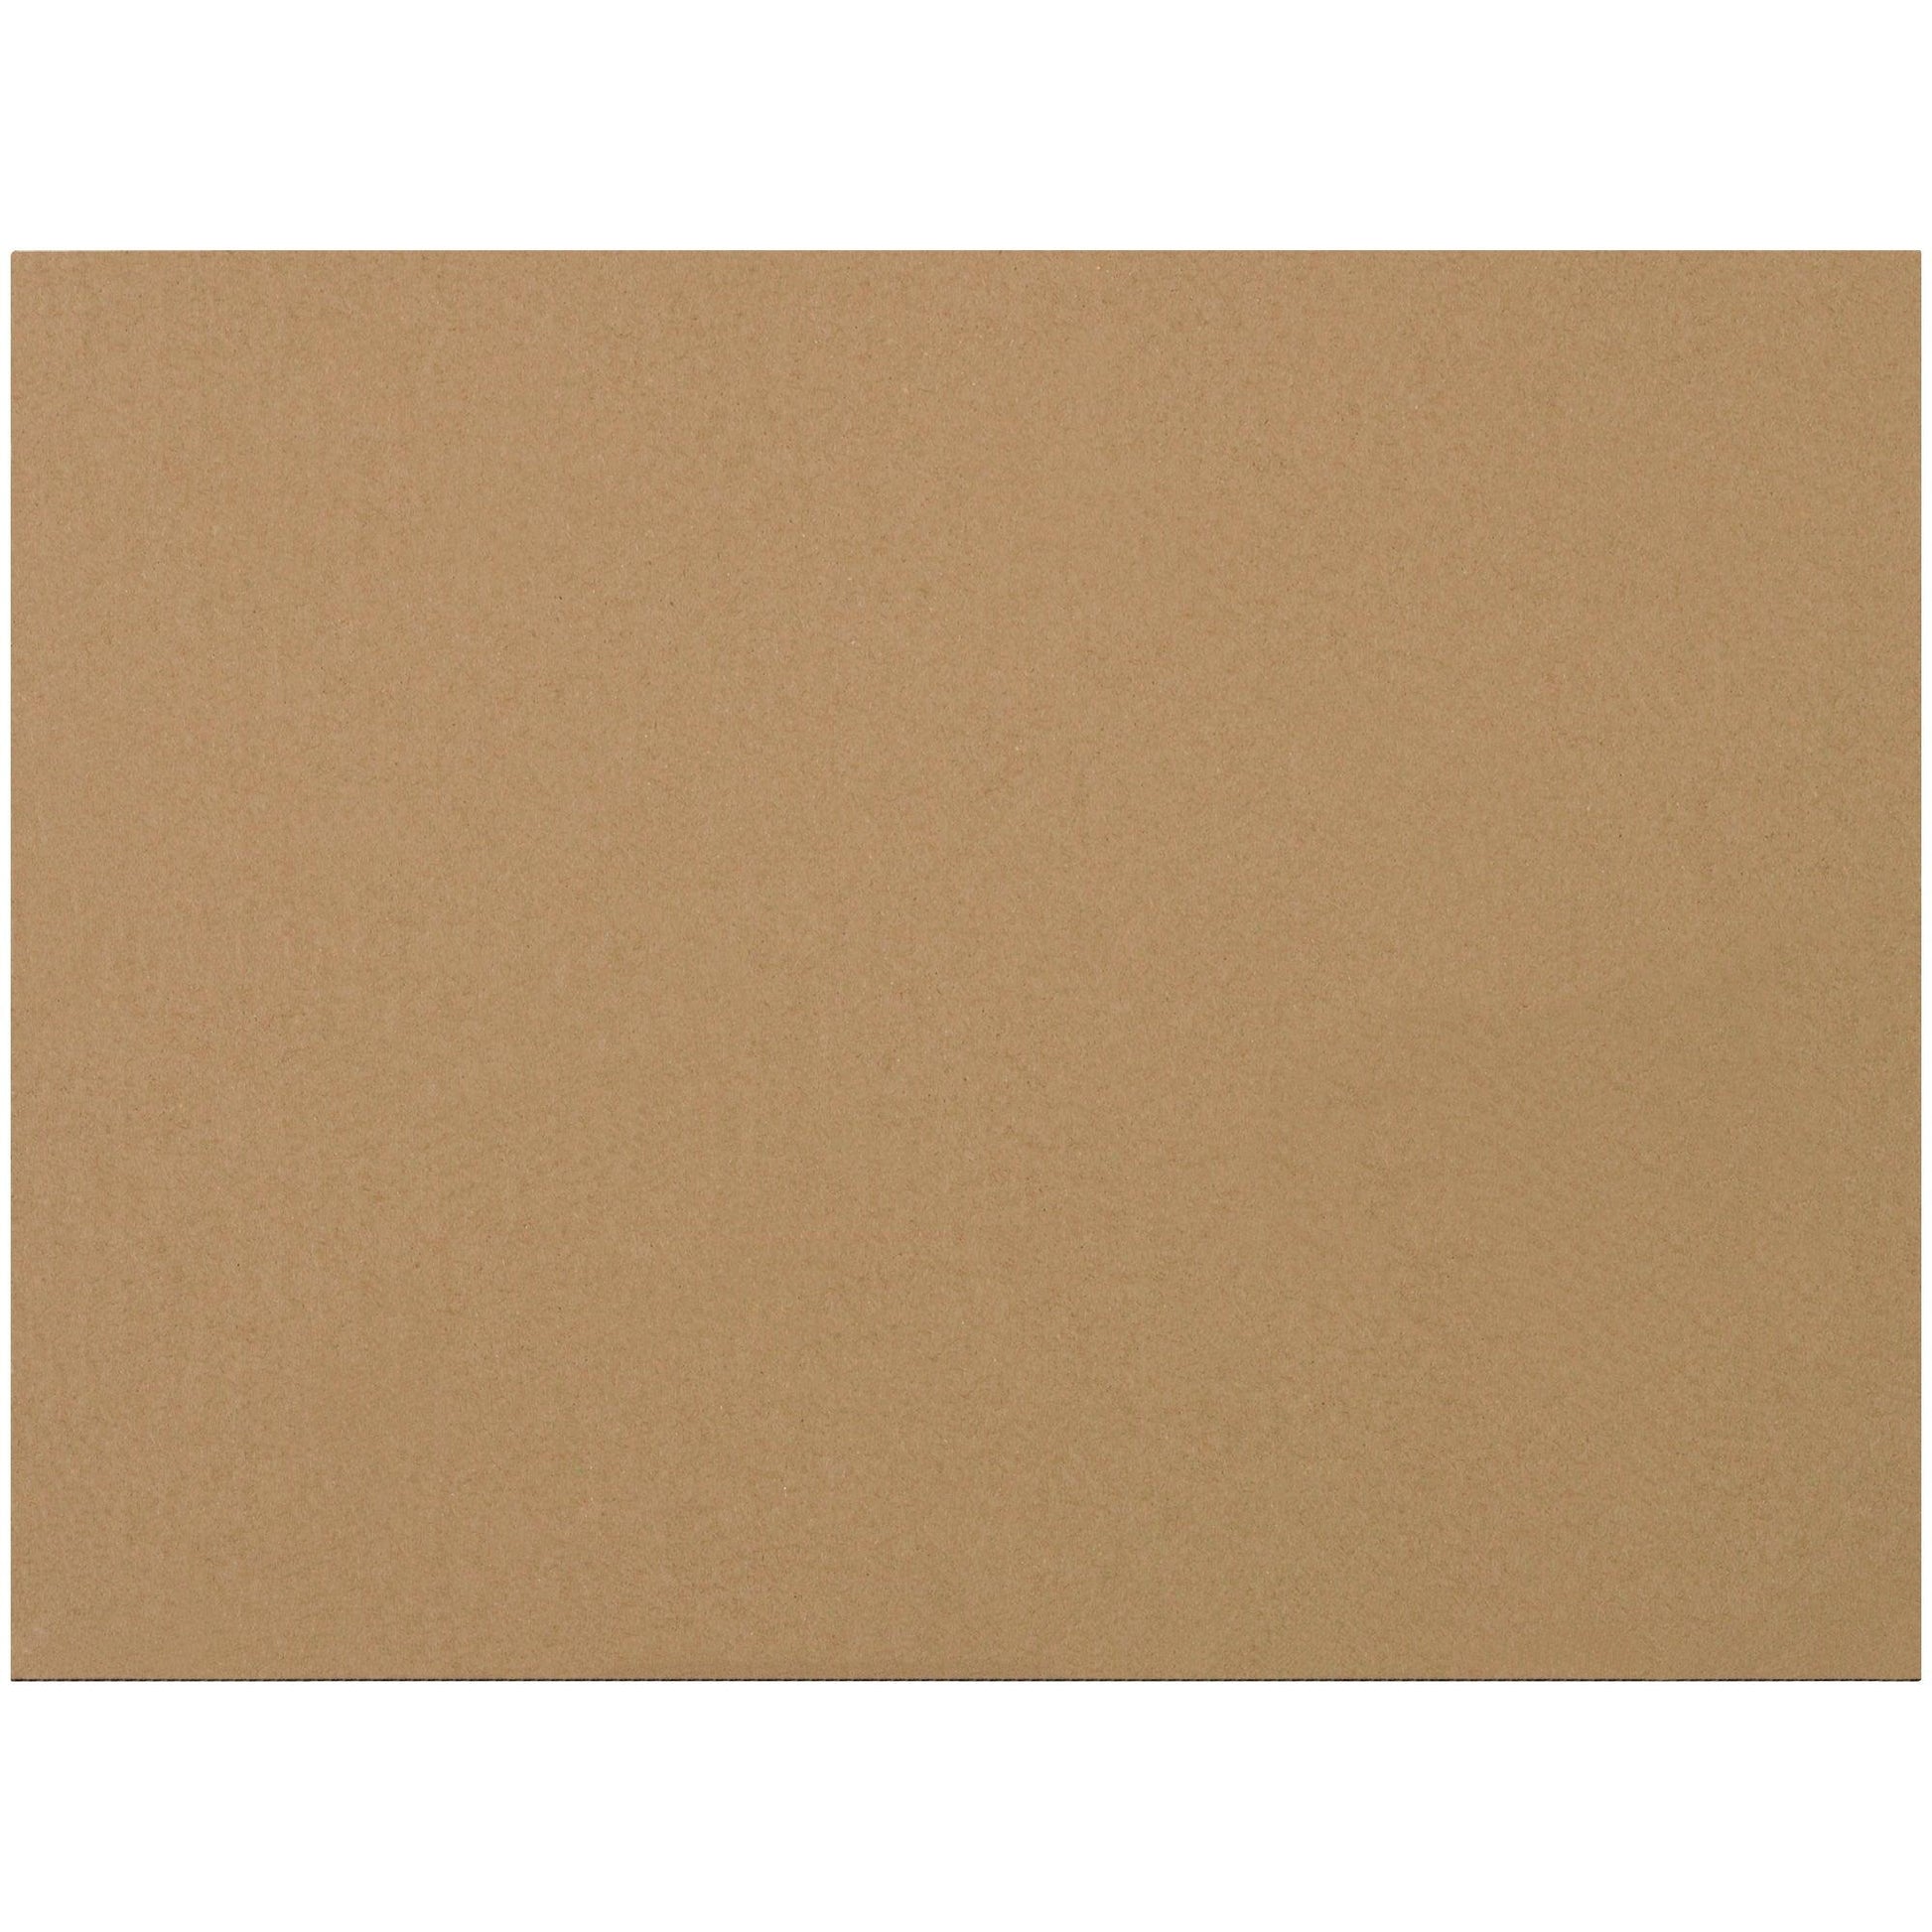 11 7/8 x 15 7/8" Corrugated Layer Pads - SP1115